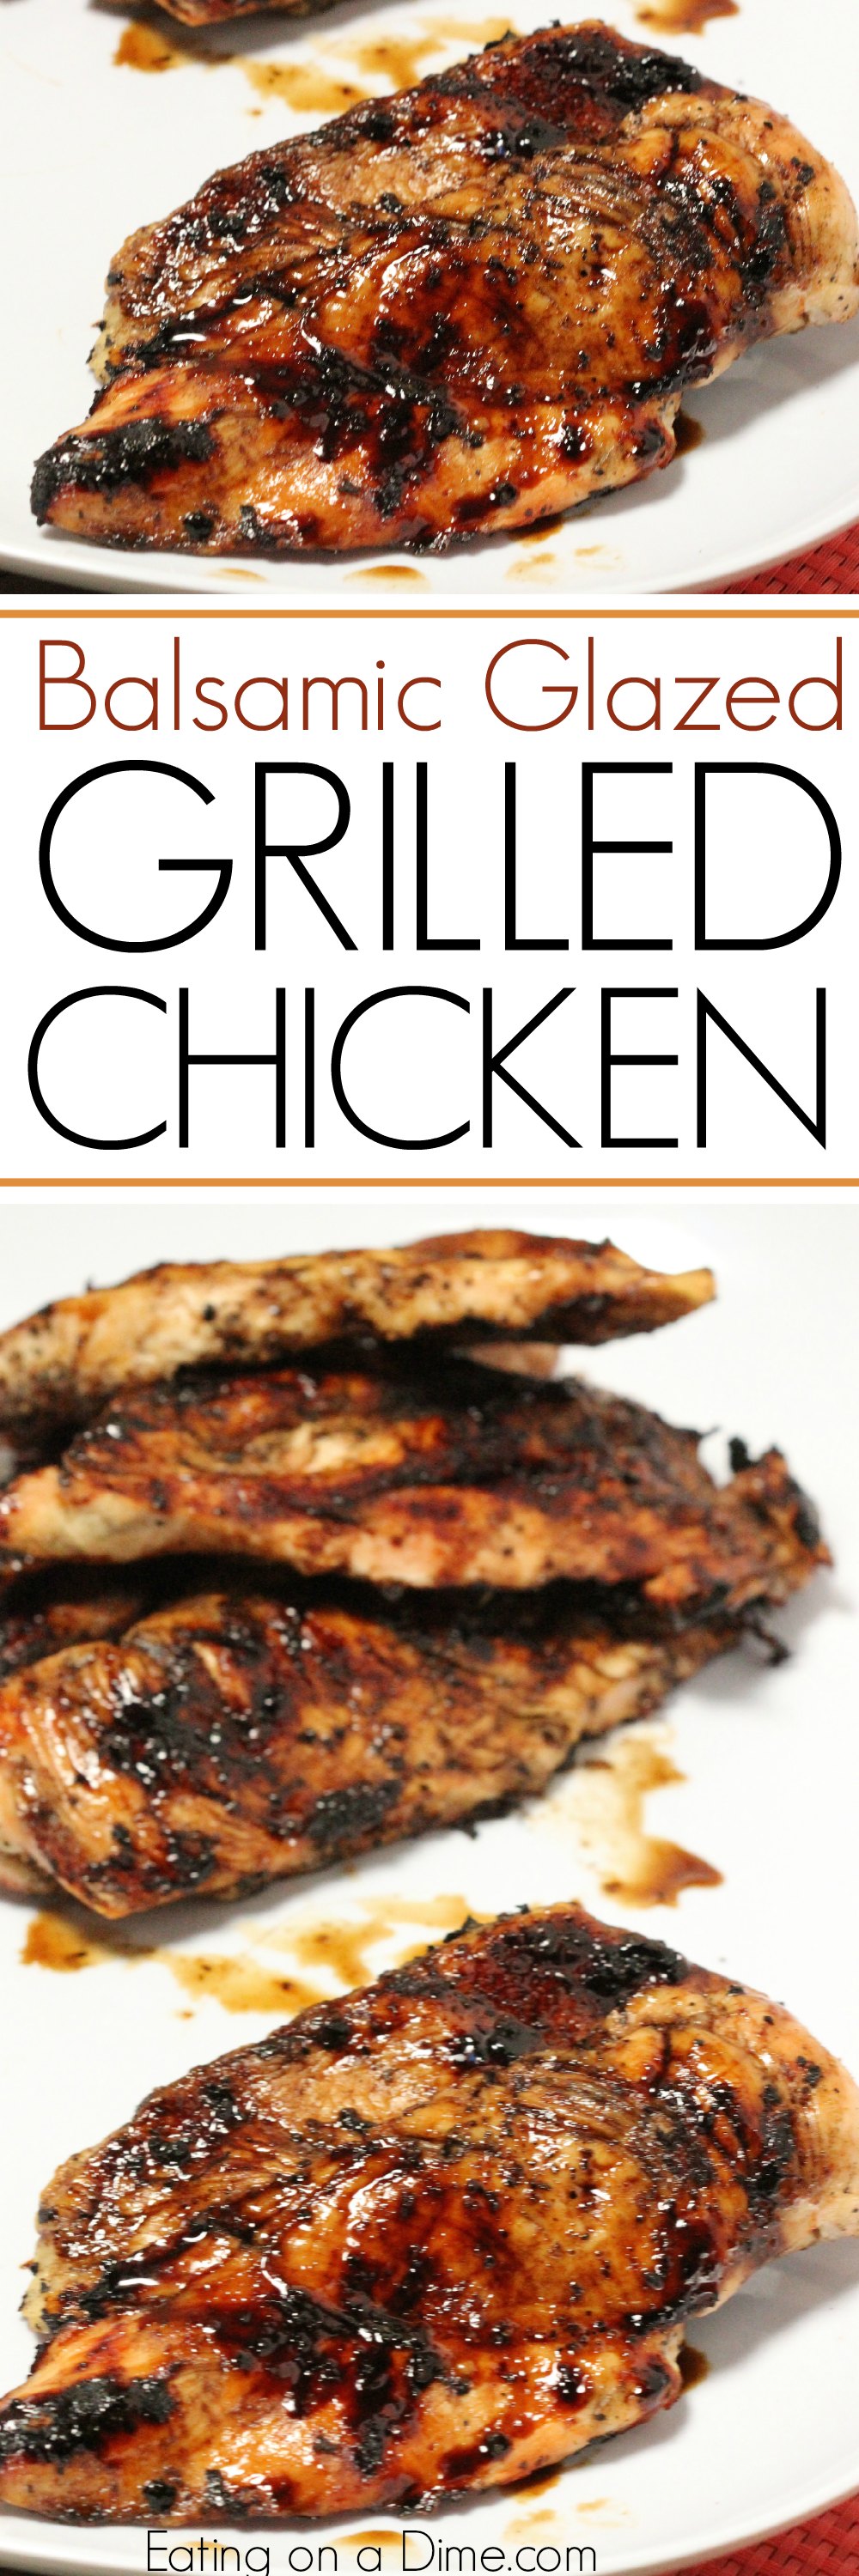 Grilled Balsamic Glazed Chicken - Eating on a Dime